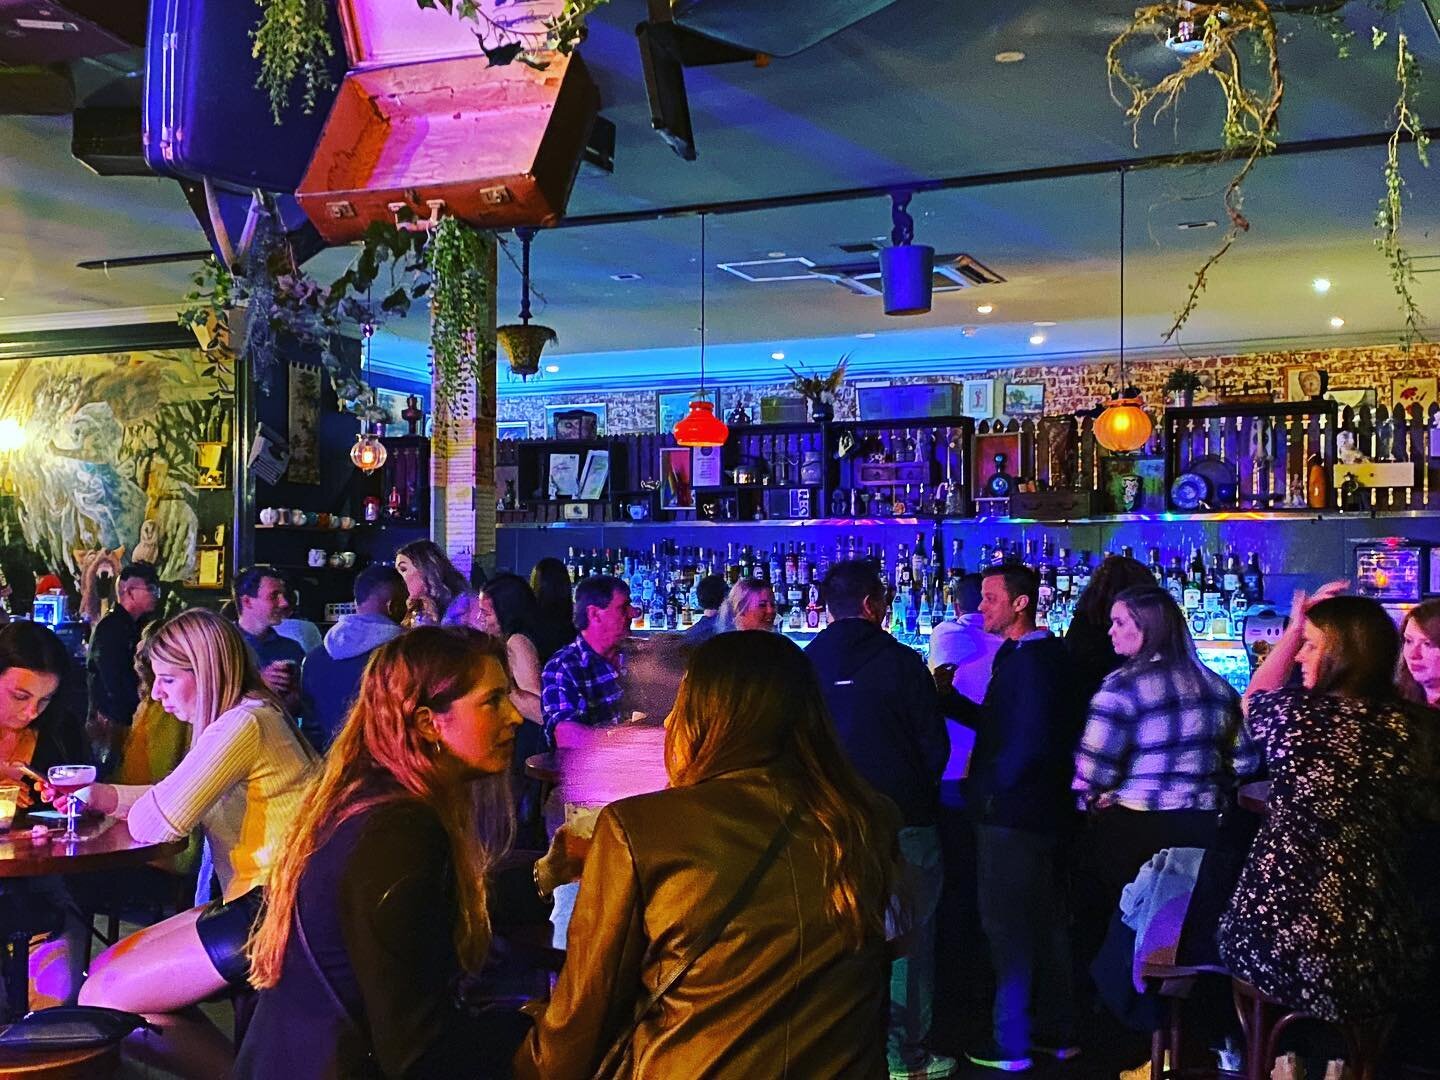 Celebrate this Easter Long Weekend @wolflaneperth 🐺🐣

Catch up with the crew and indulge in your favourite cocktails at Perth&rsquo;s original hidden bar 🍸

@soulsounddjs dropping nothing but funk, soul &amp; disco from 7pm-late setting the vibes 